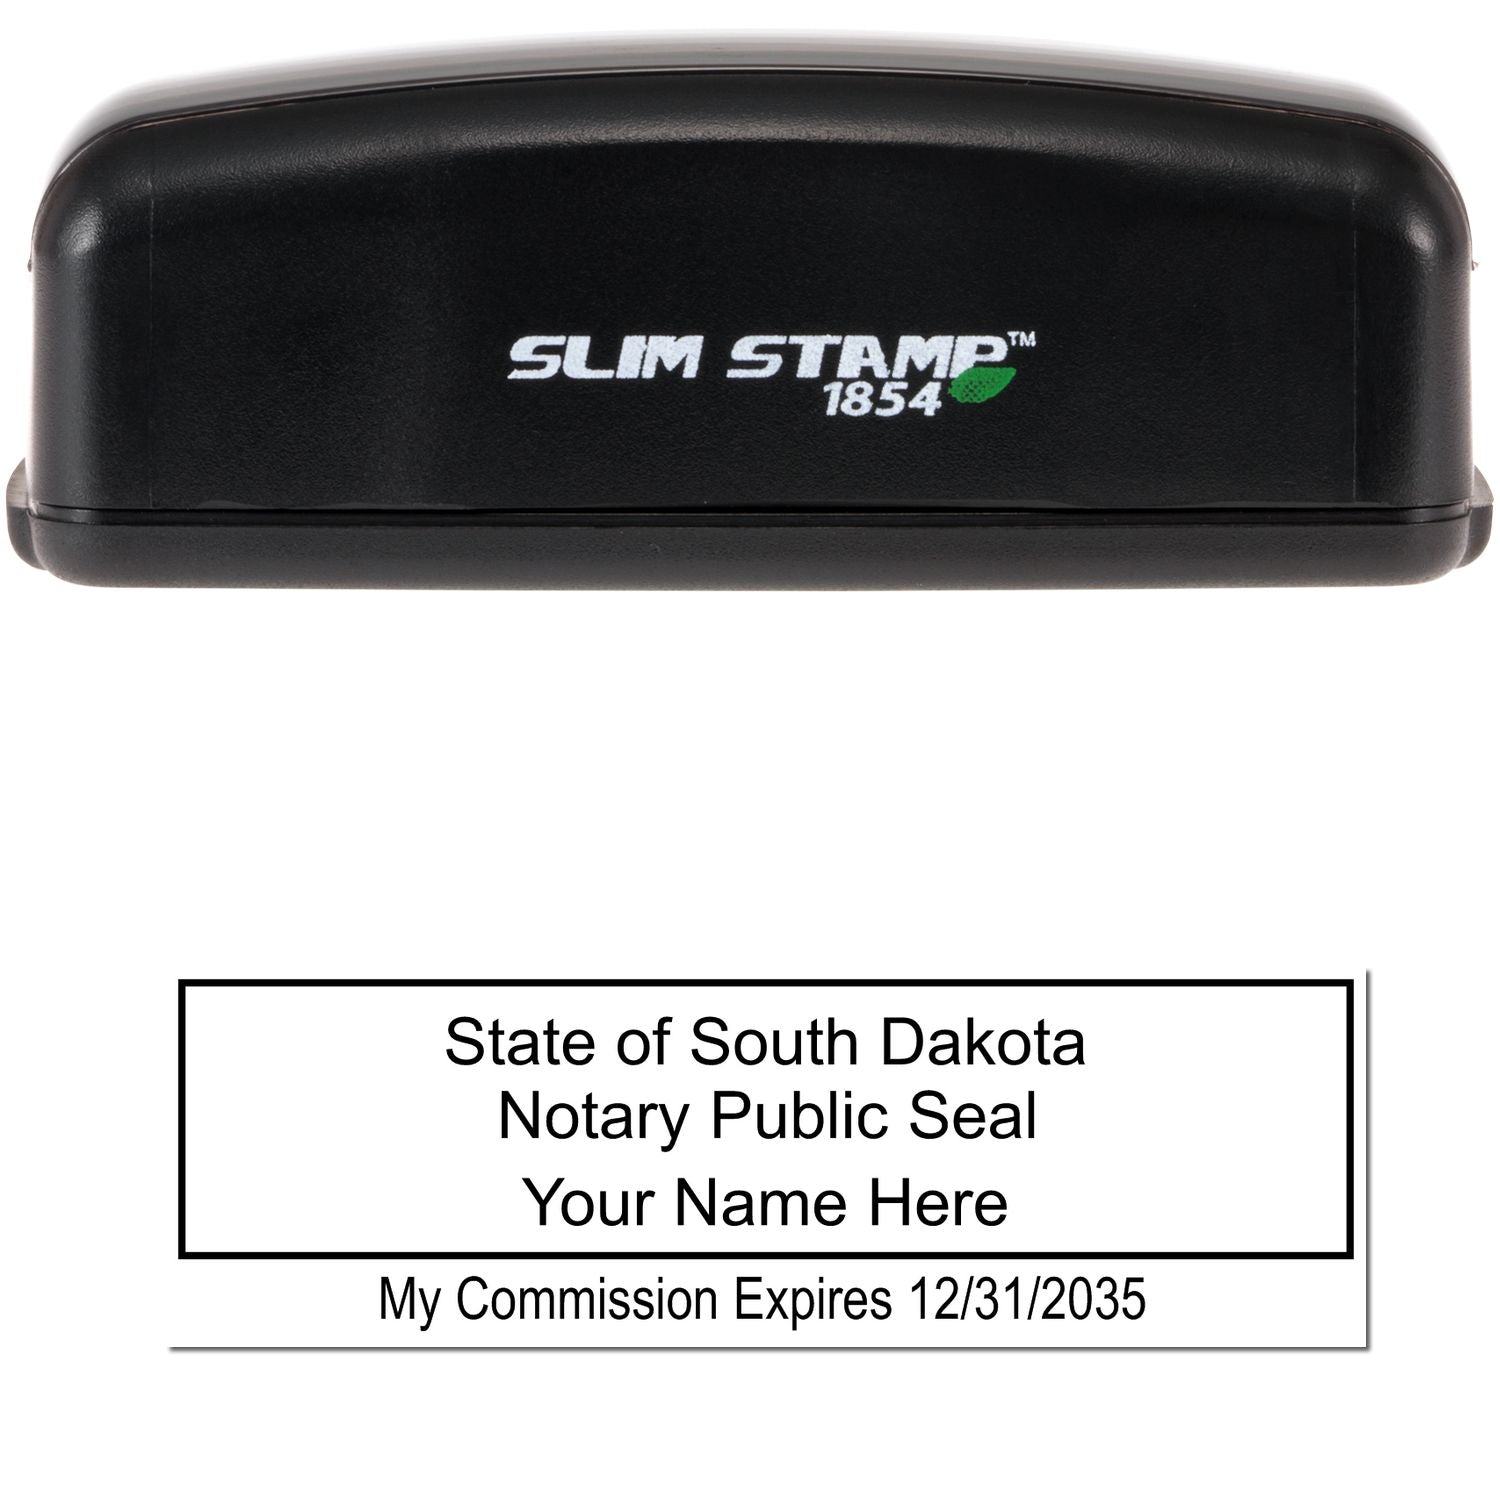 The main image for the Slim Pre-Inked Rectangular Notary Stamp for South Dakota depicting a sample of the imprint and electronic files